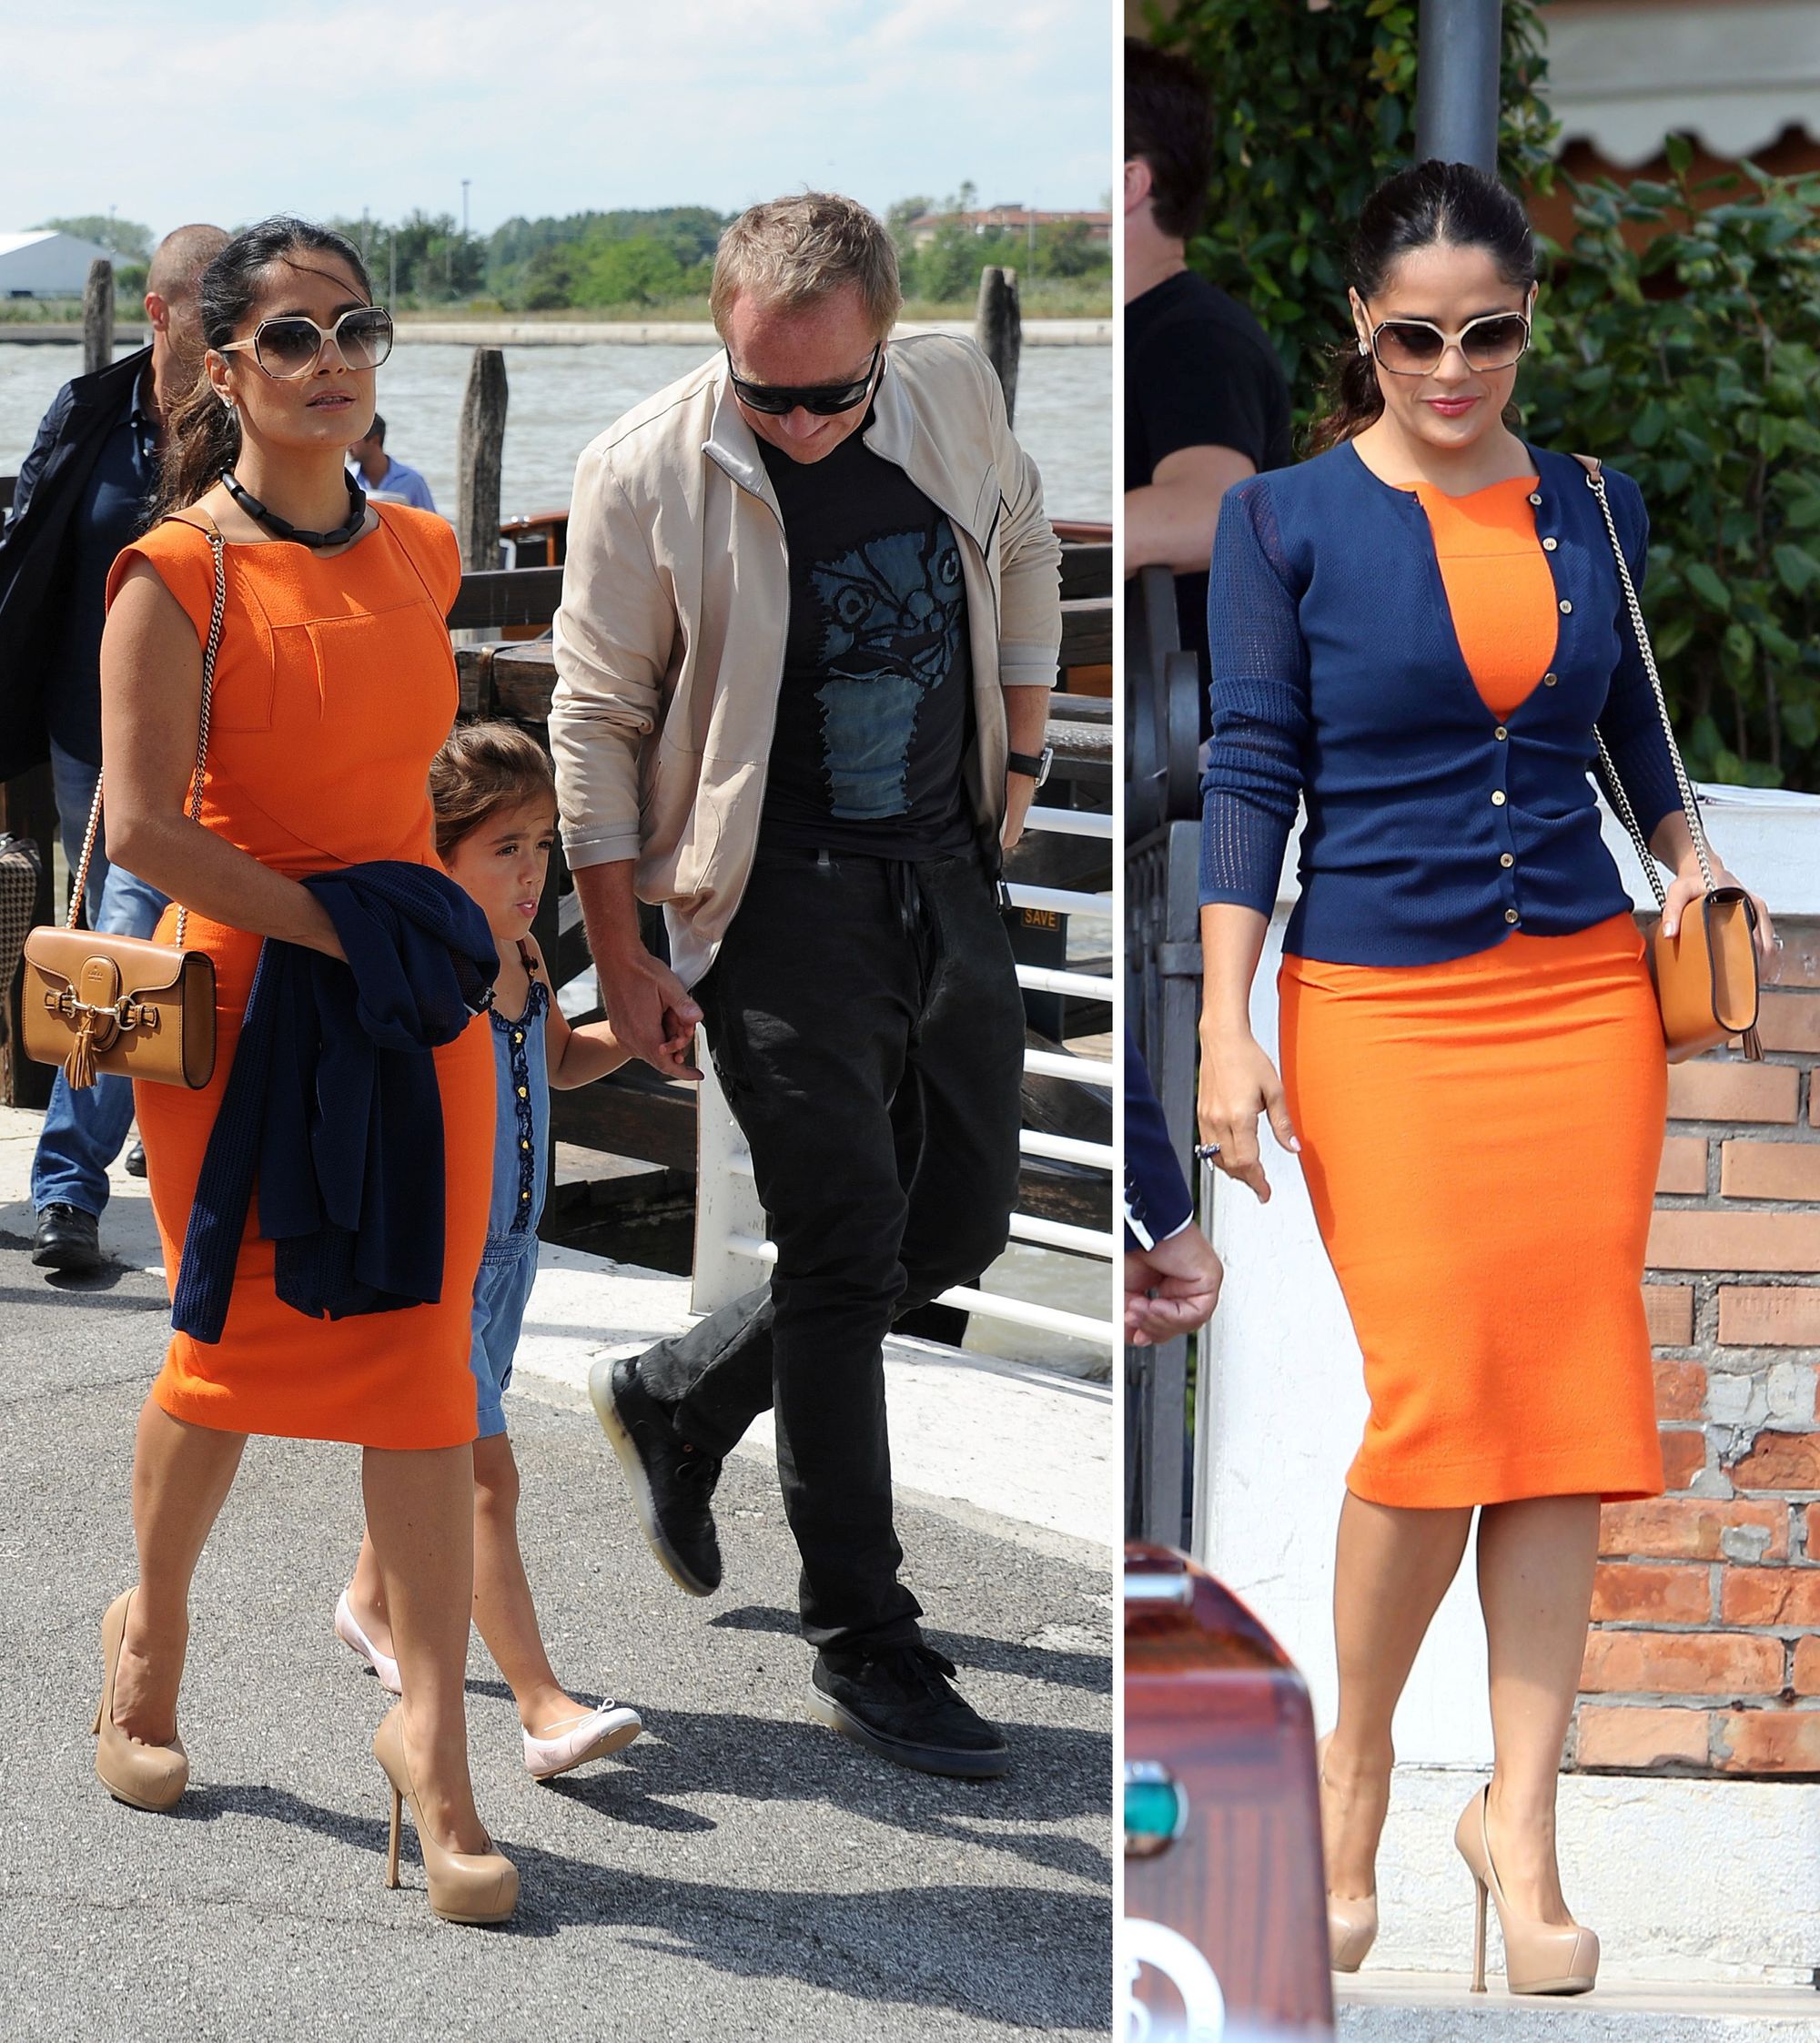 Salma Hayek-Pinault in nude YSL Tribtoo pumps and Gucci 'Emily' chain shoulder bag